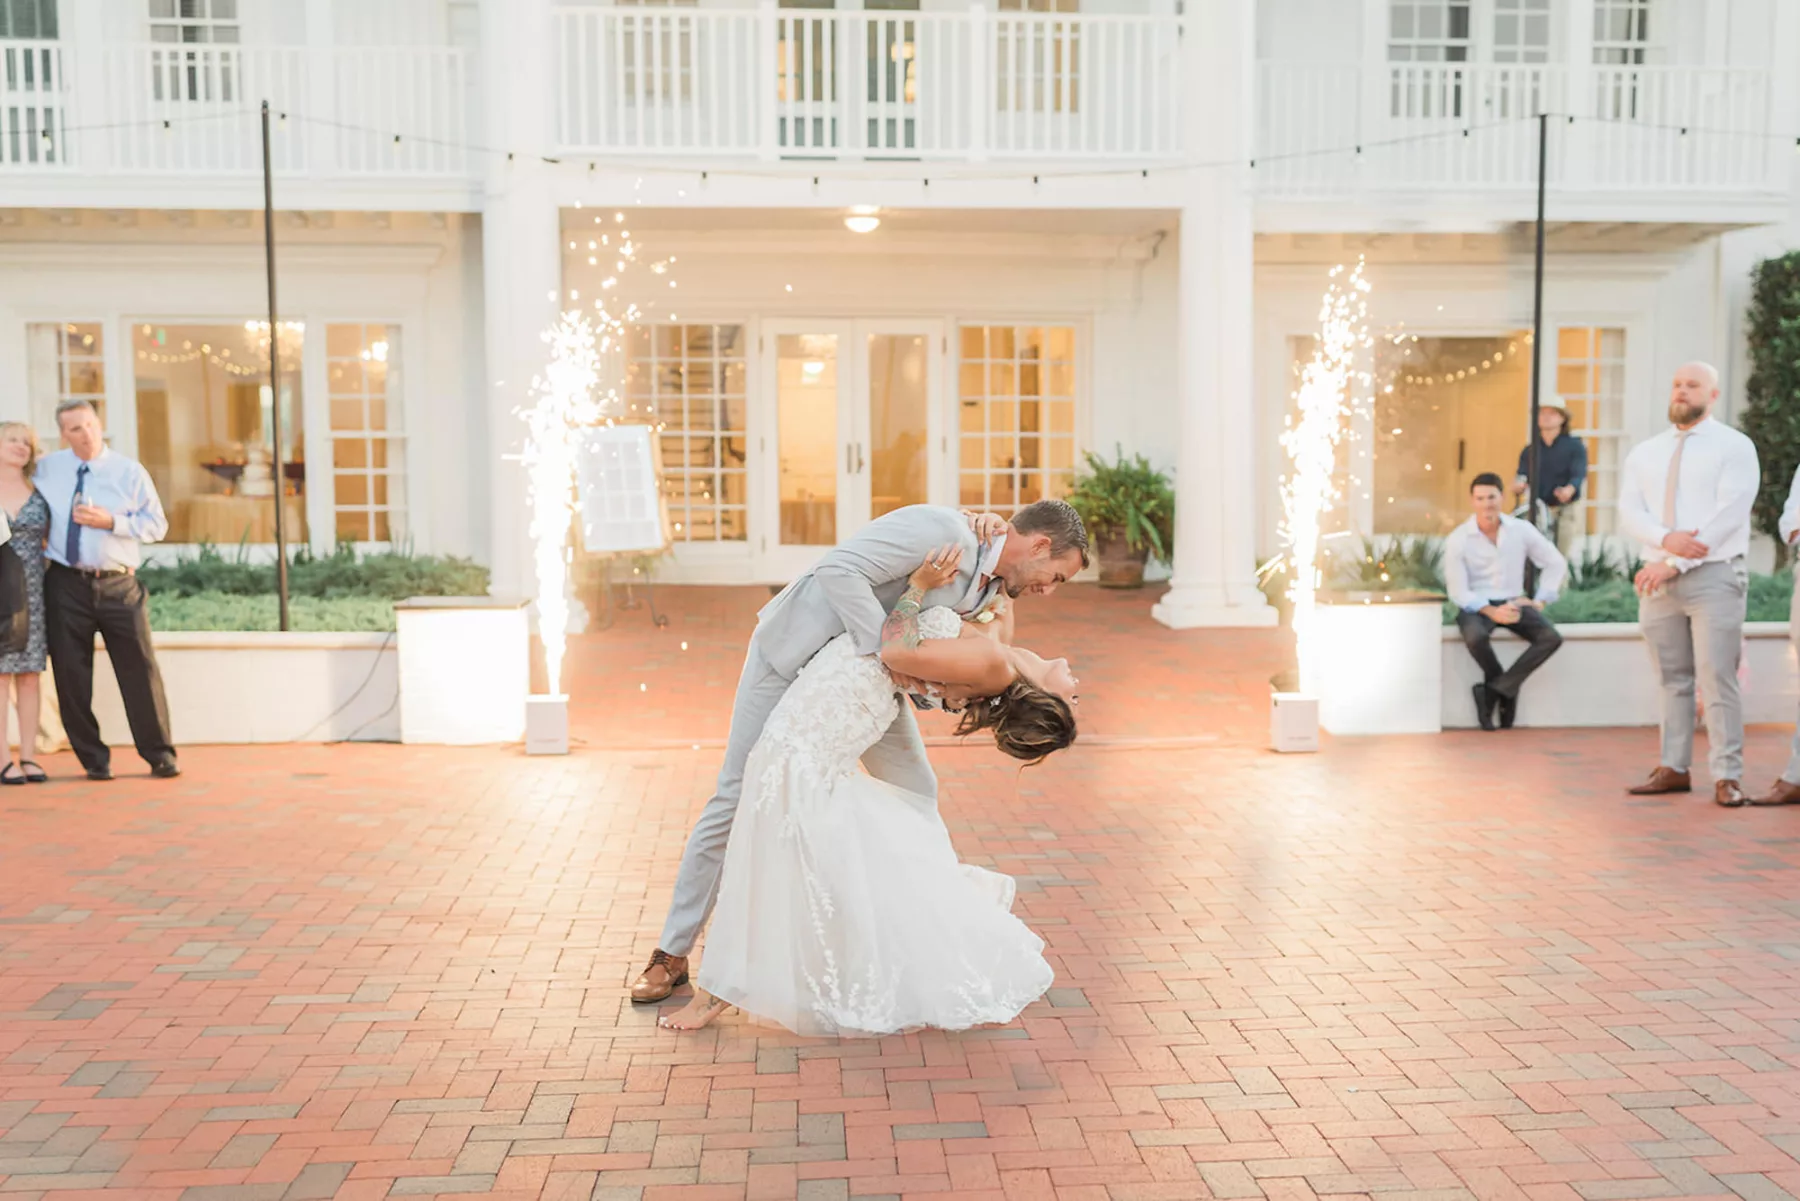 Bride and Groom First Dance Outdoor Terrace Wedding Reception | Market String Lights and Cold Spark Machines Decor Entertainment Inspiration